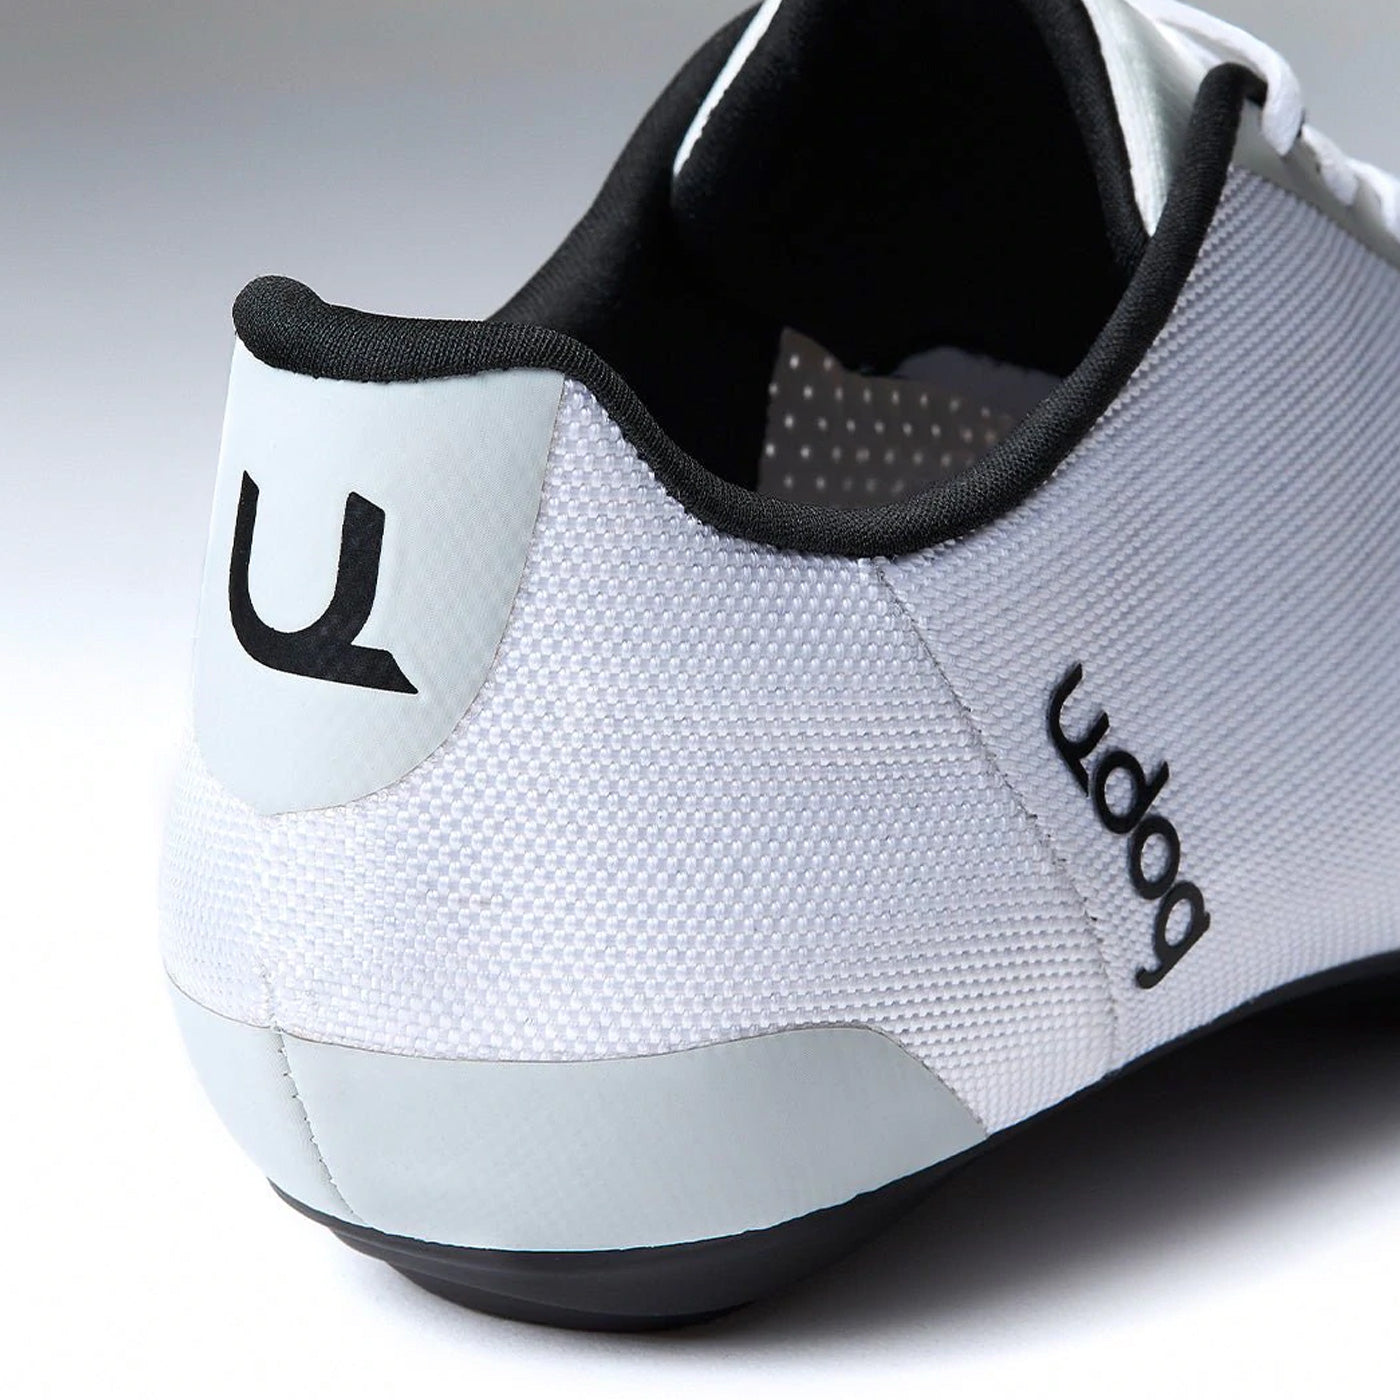 Udog Tensione shoes - White